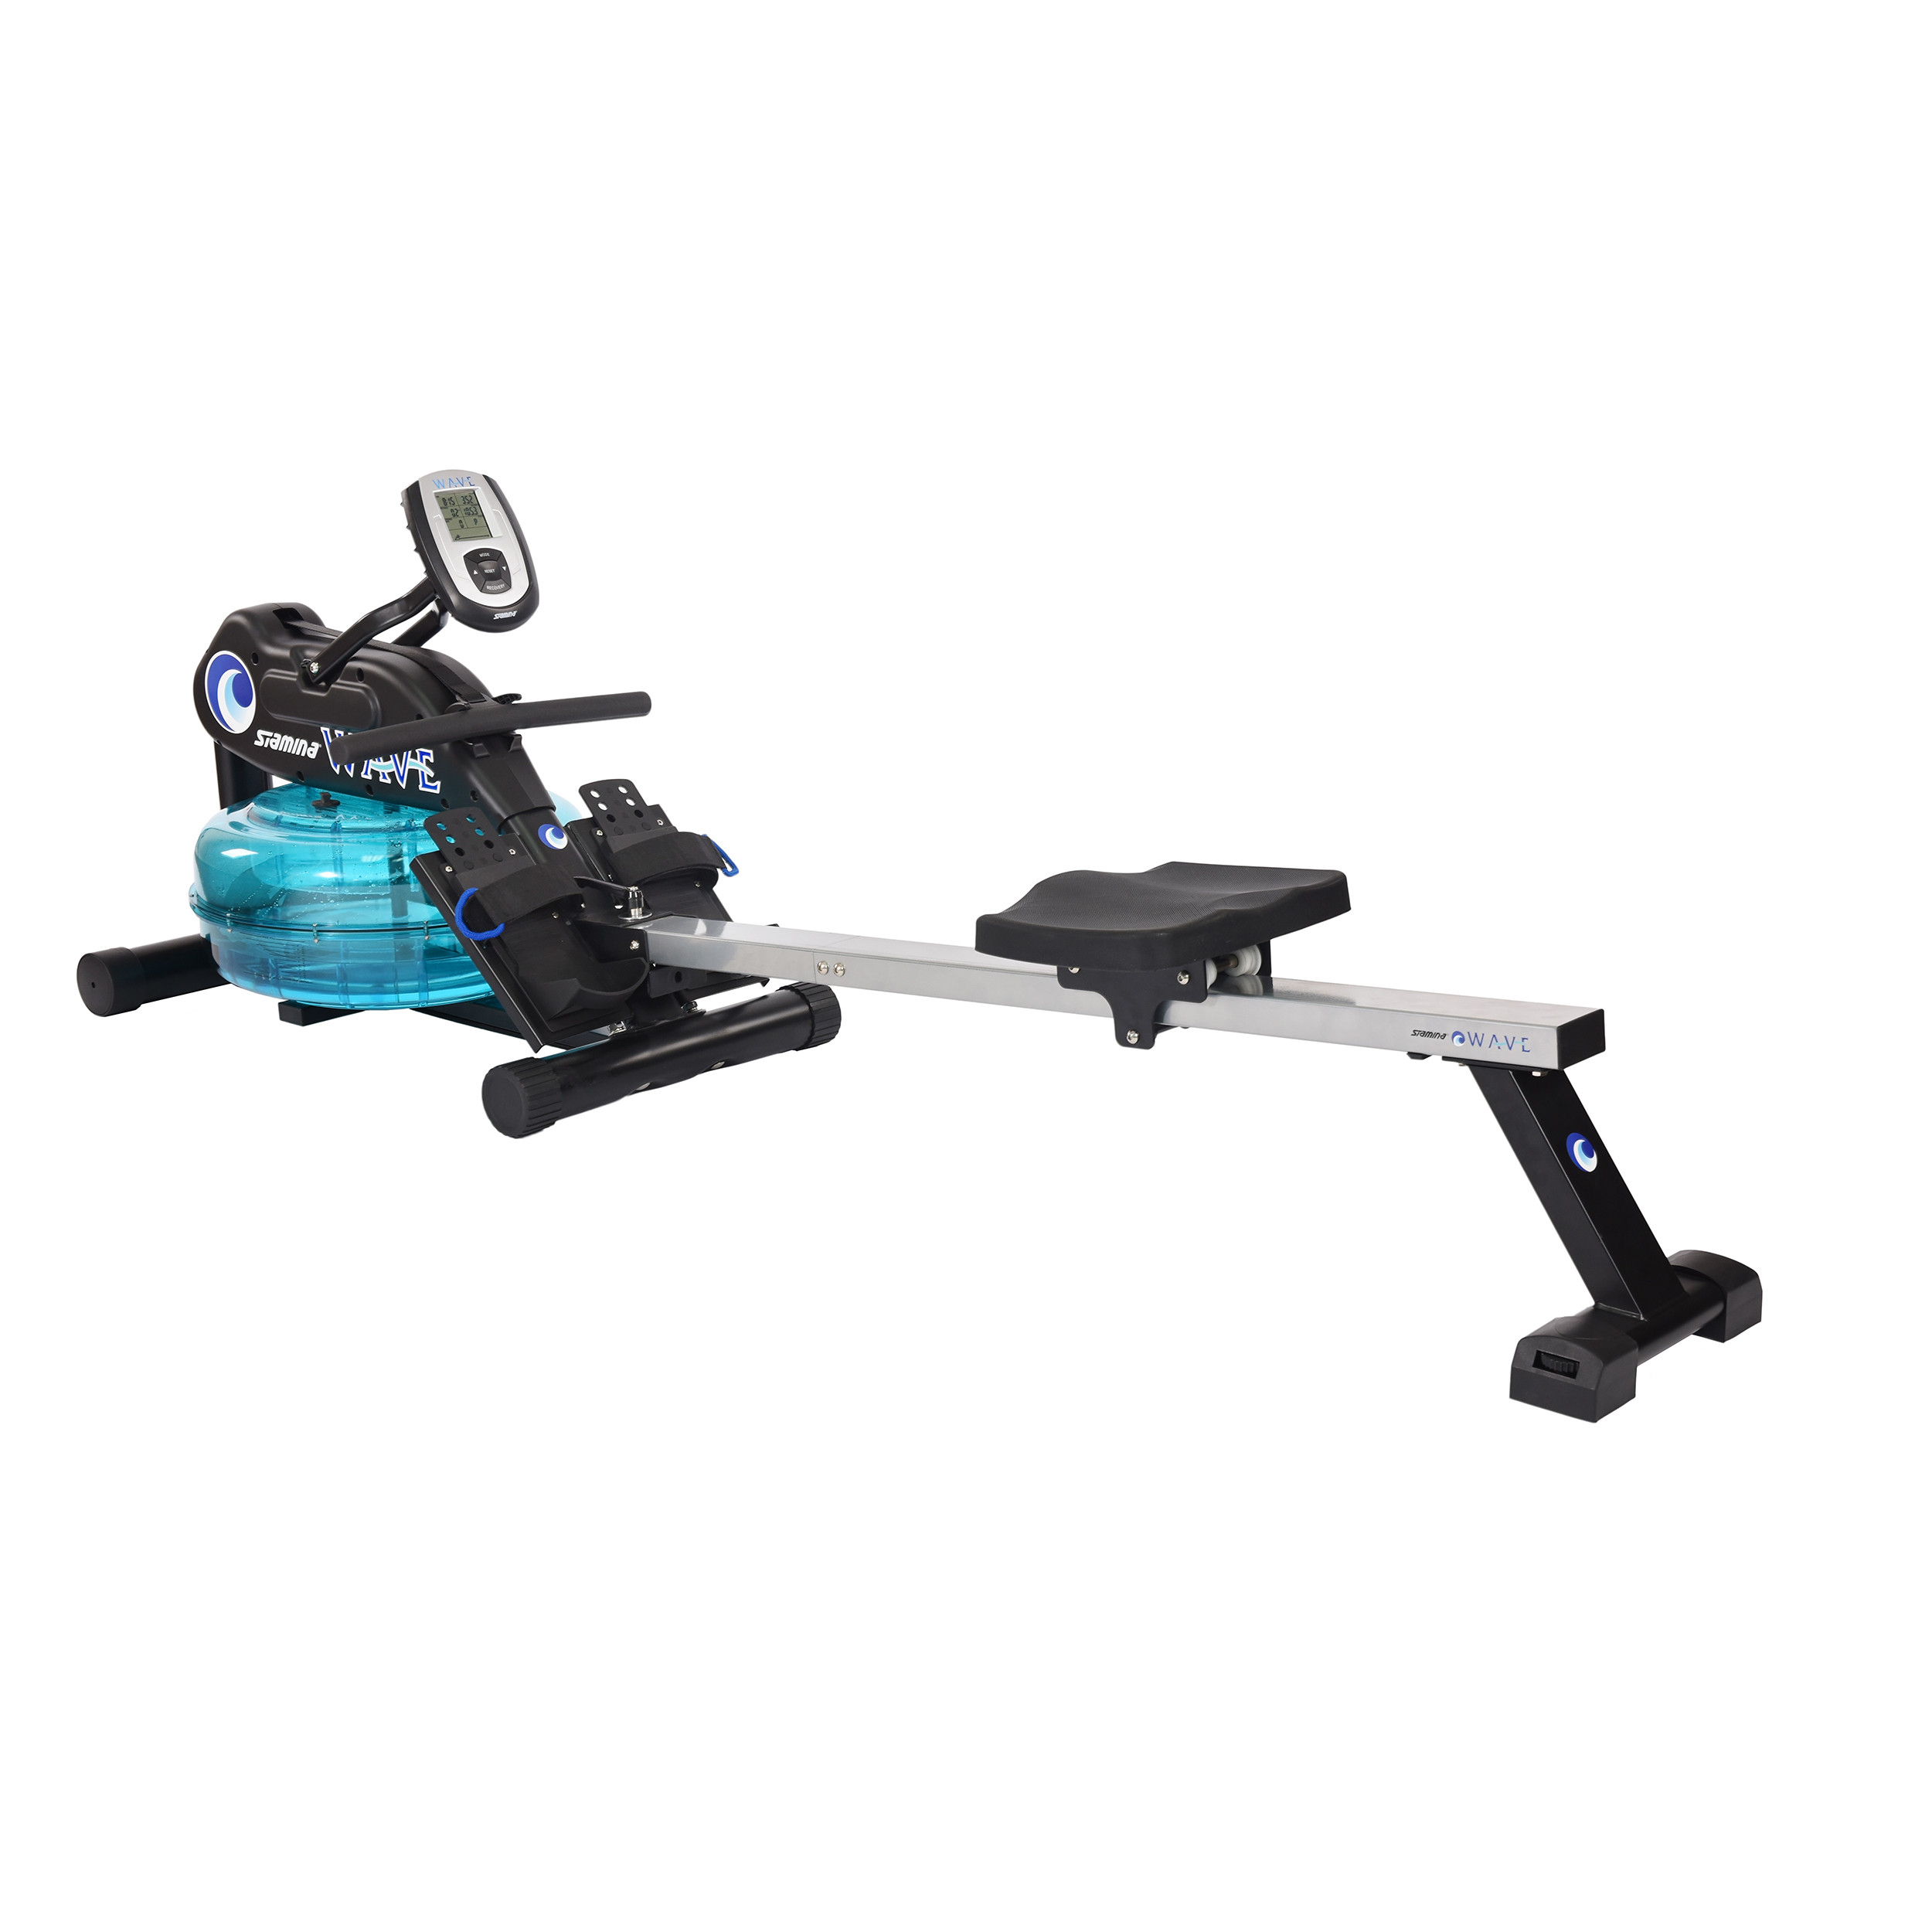 21 Wonderful Pc Hardwood Floors Supplies 2024 free download pc hardwood floors supplies of stamina elite wave water rowing machine 1450 stamina products inside stamina products elite wave water rowing machine at home use gym equipment